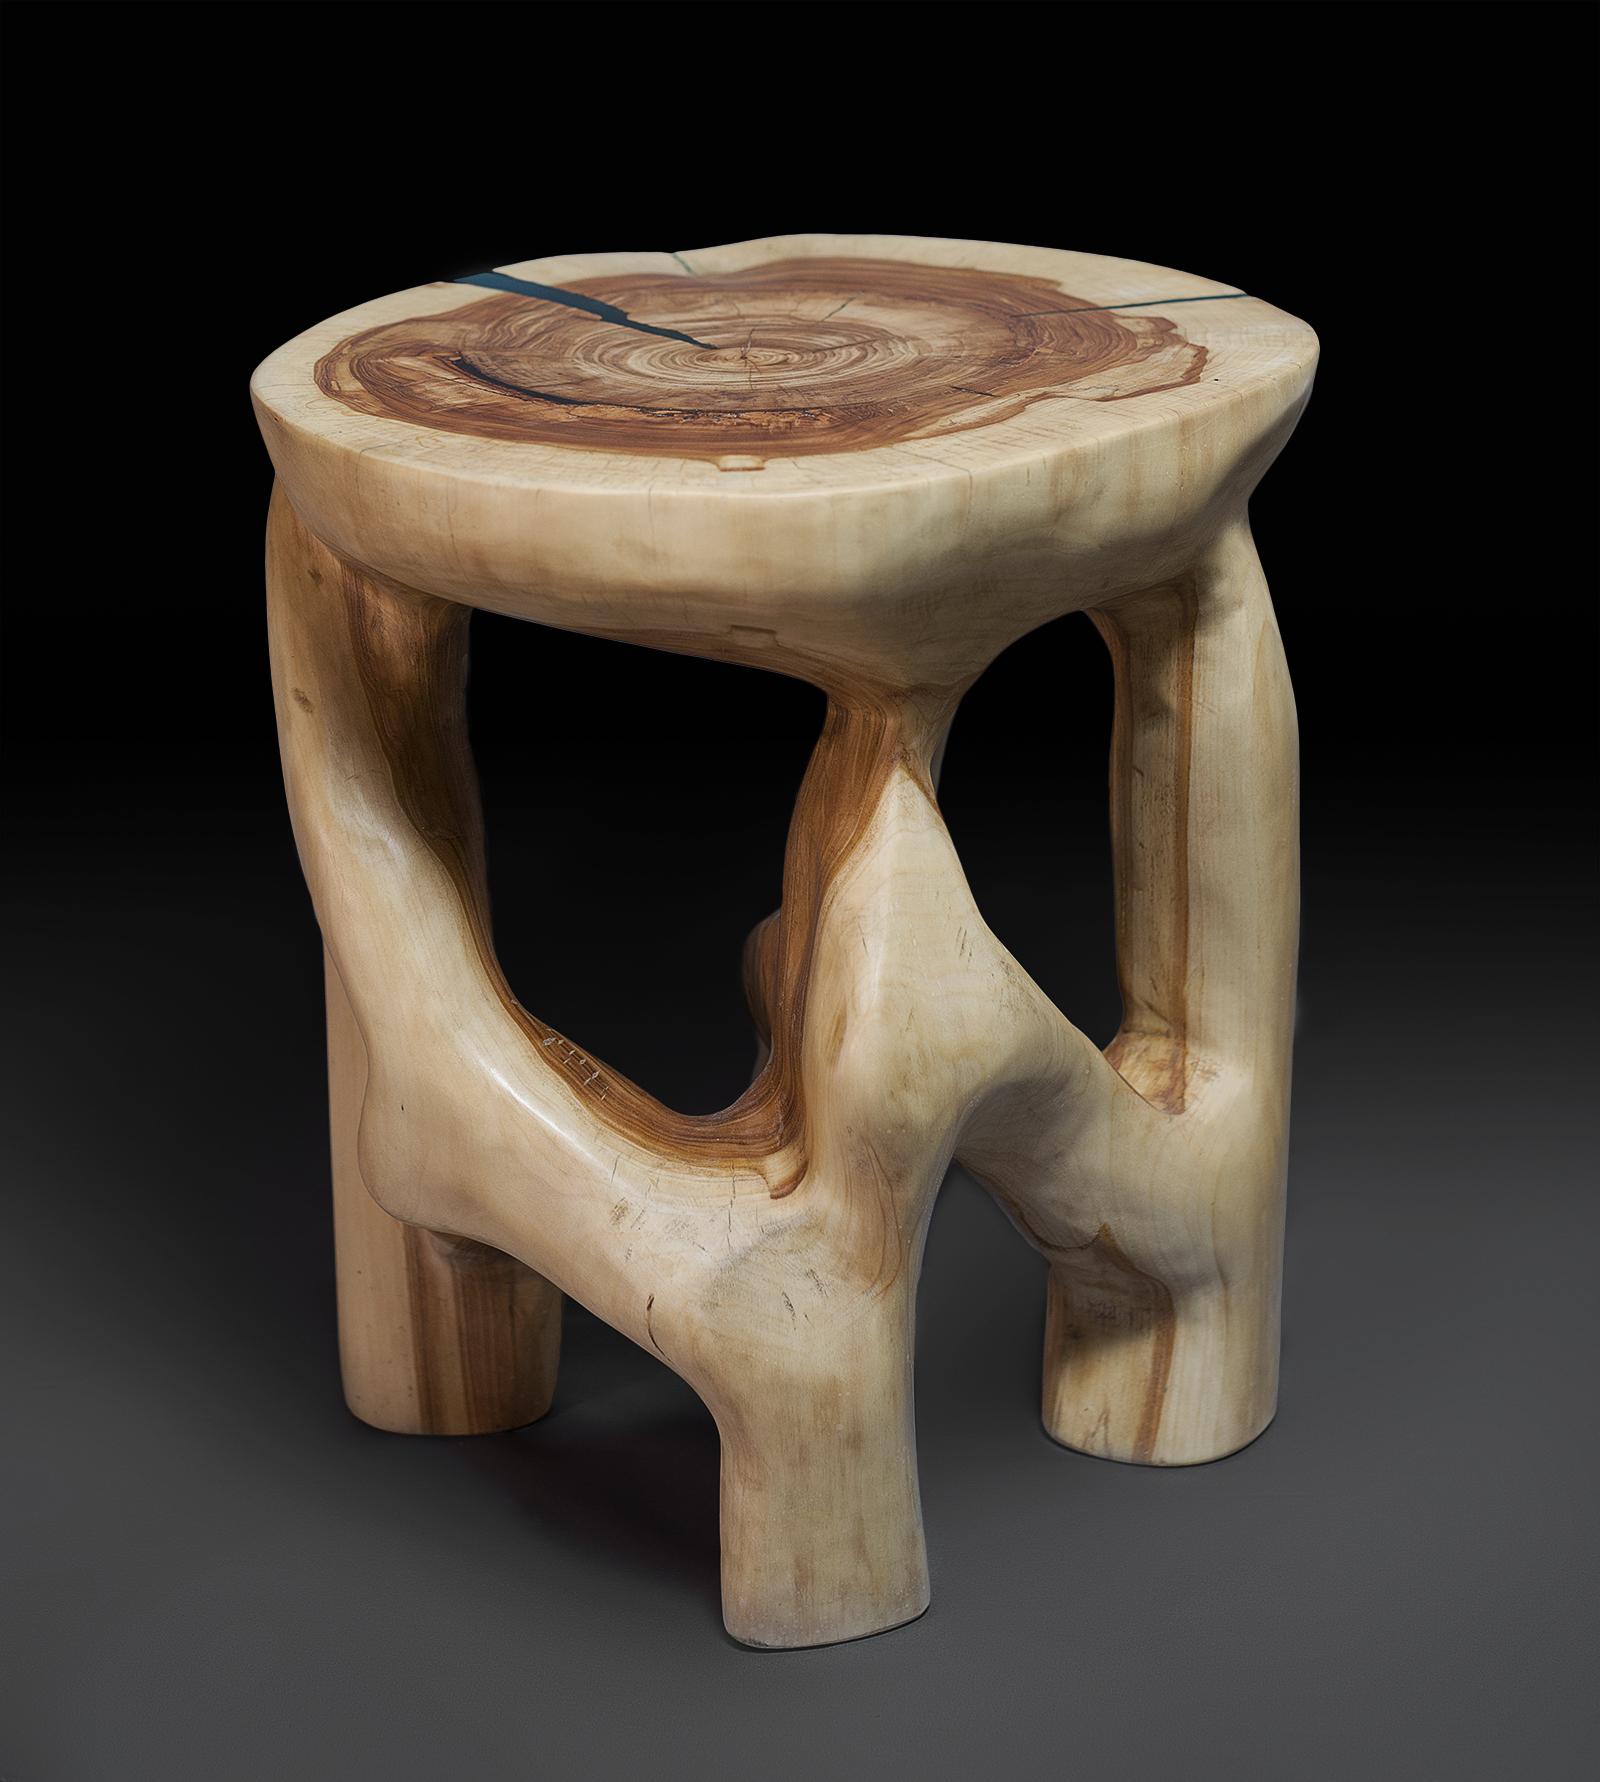 Unique chainsaw carved wooden functional sculpture usable as a multifunctional piece such as, tabouret, side table, night stand or even pedestal for your art. Carved from a single piece of wood and protected with the highest quality oils, ensuring